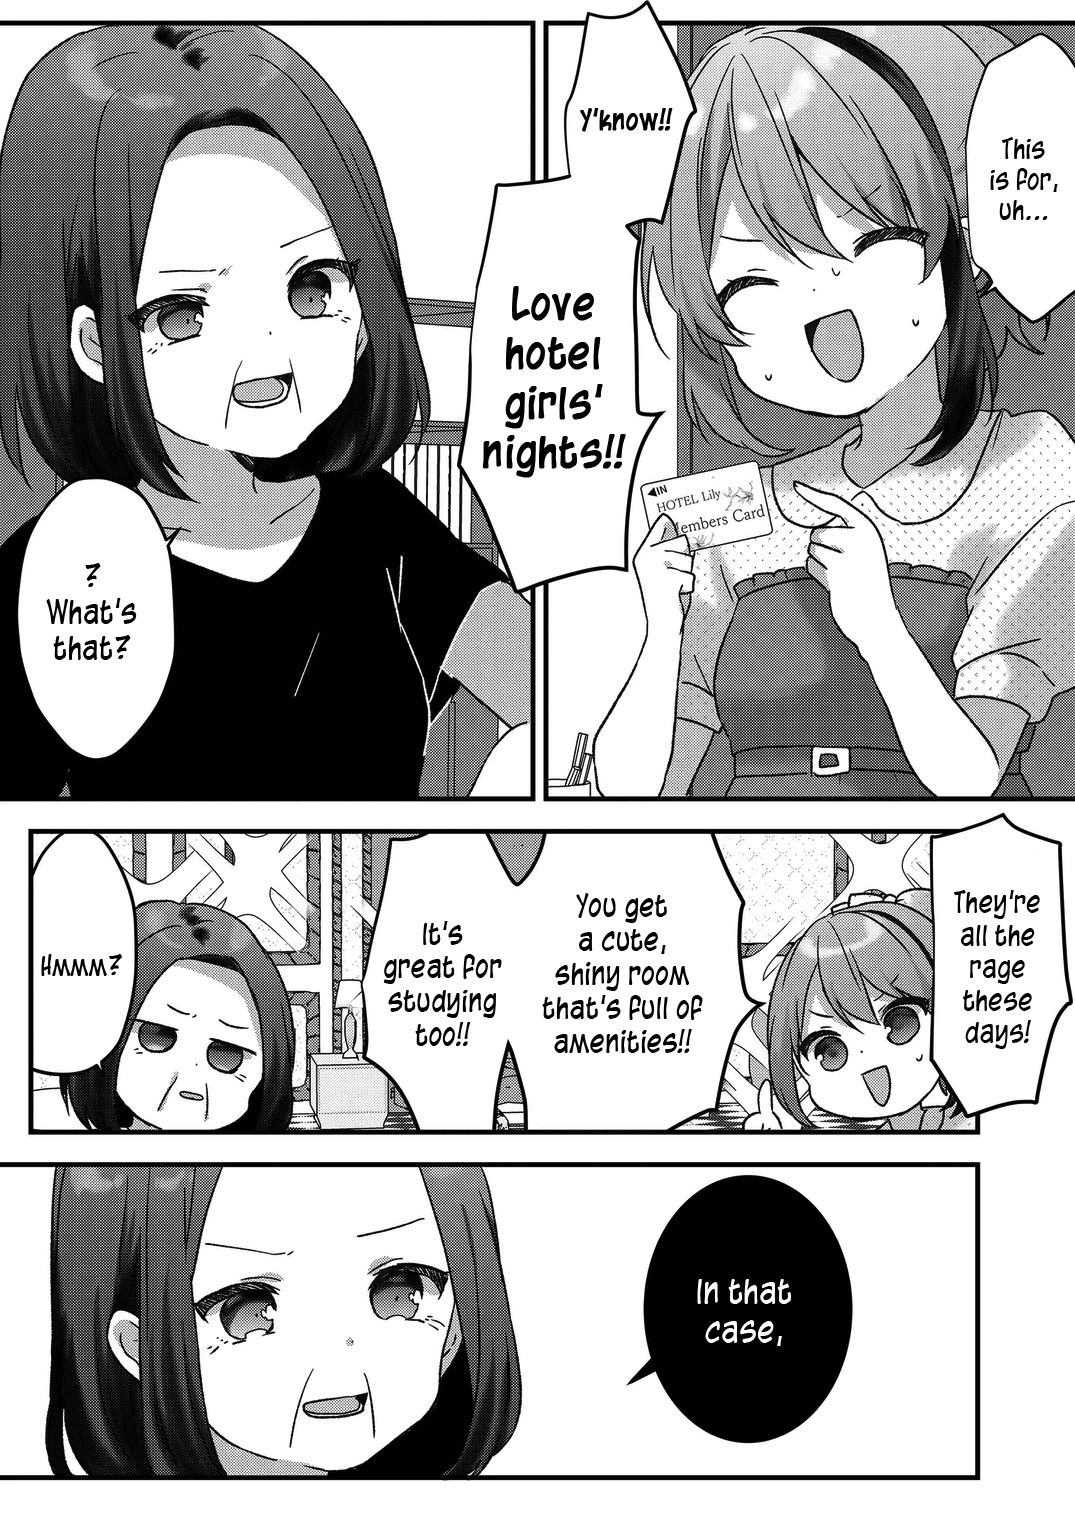 Failed University Exams I am Trash and Life is Hard, so I Tried Calling an Onee-san at Night - chapter 29 - #5